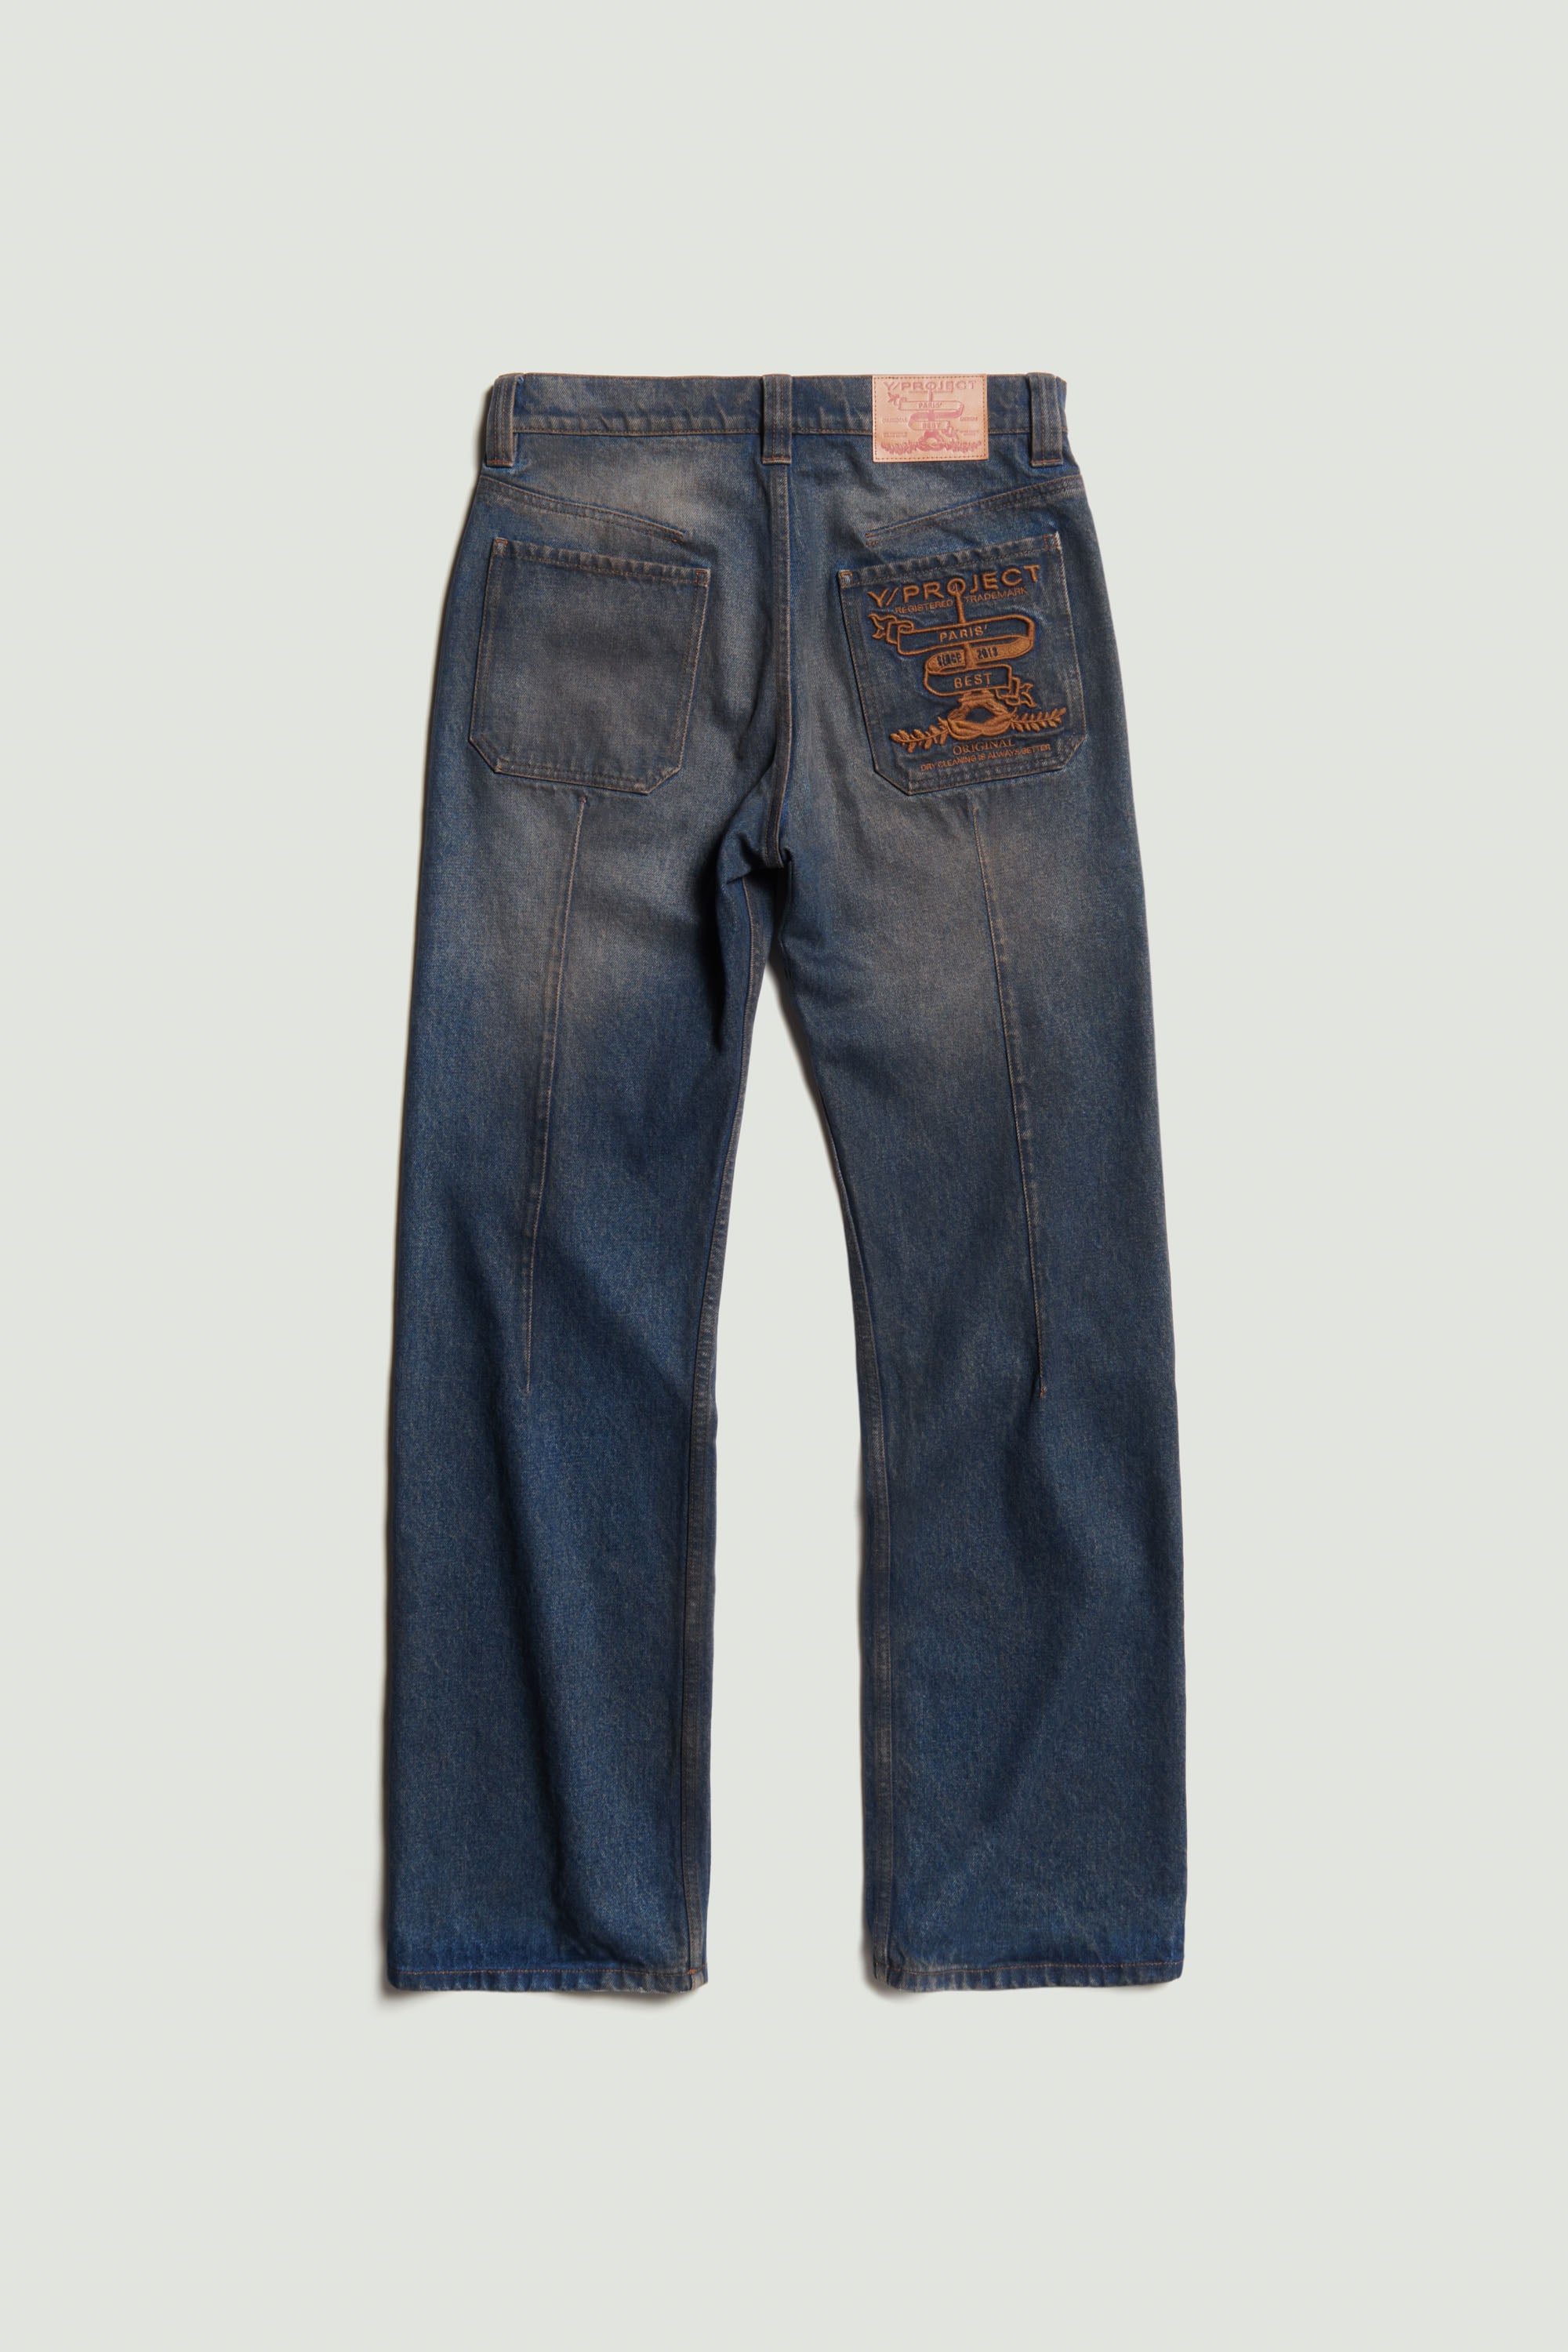 Y/Project Blue Faded Jeans